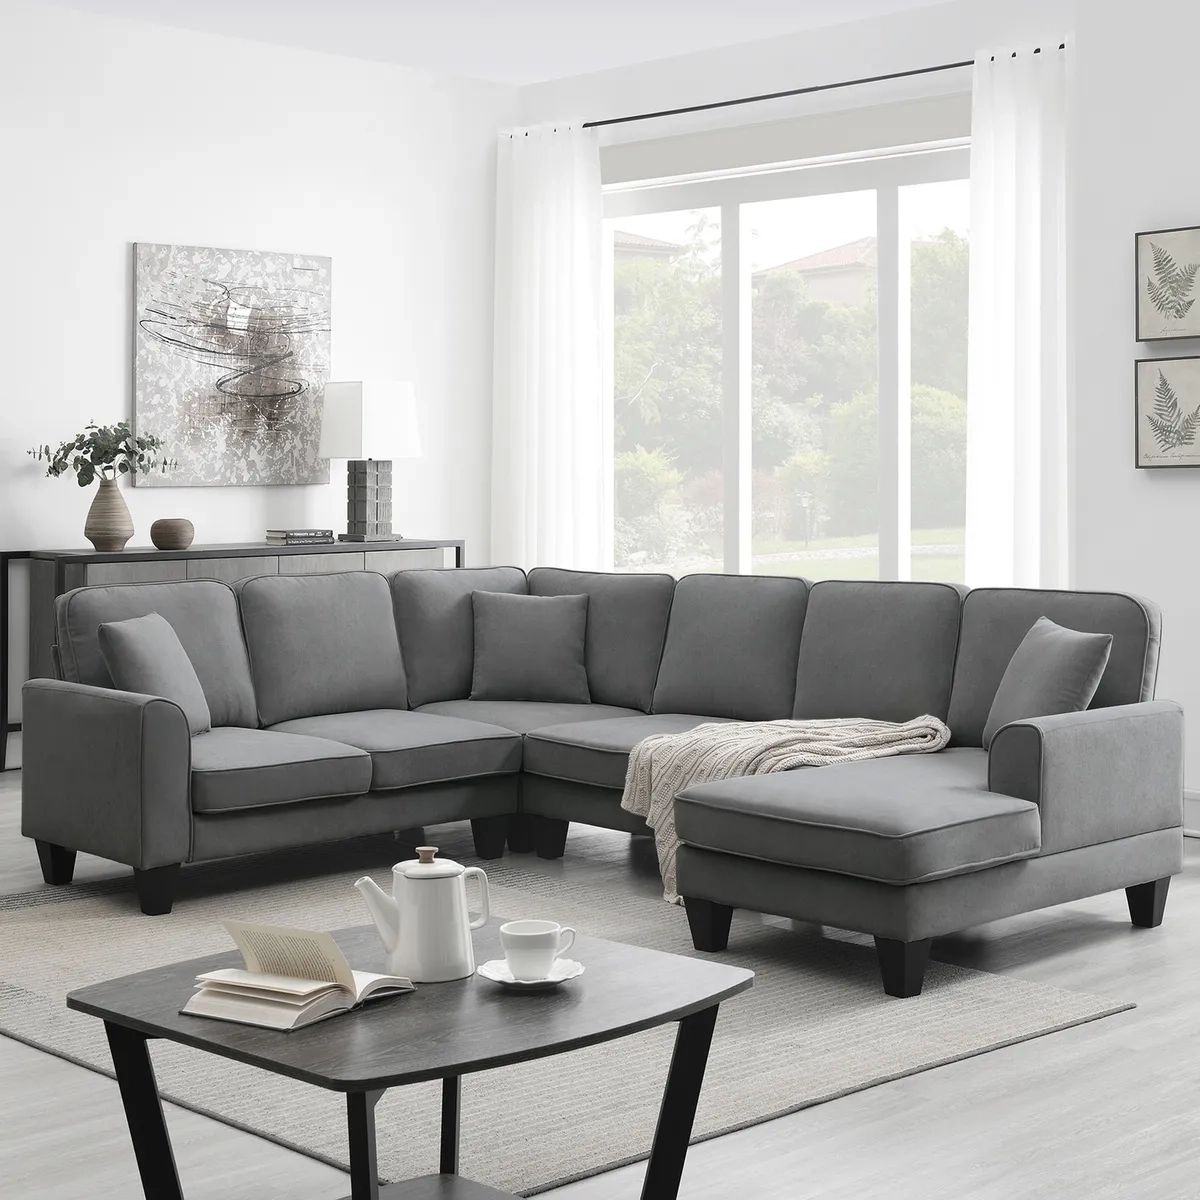 7 Seat Sectional Sofa Set Modern Furniture U Shape Couch Living Room, 3  Pillow | Ebay For Modern U Shaped Sectional Couch Sets (Photo 3 of 15)